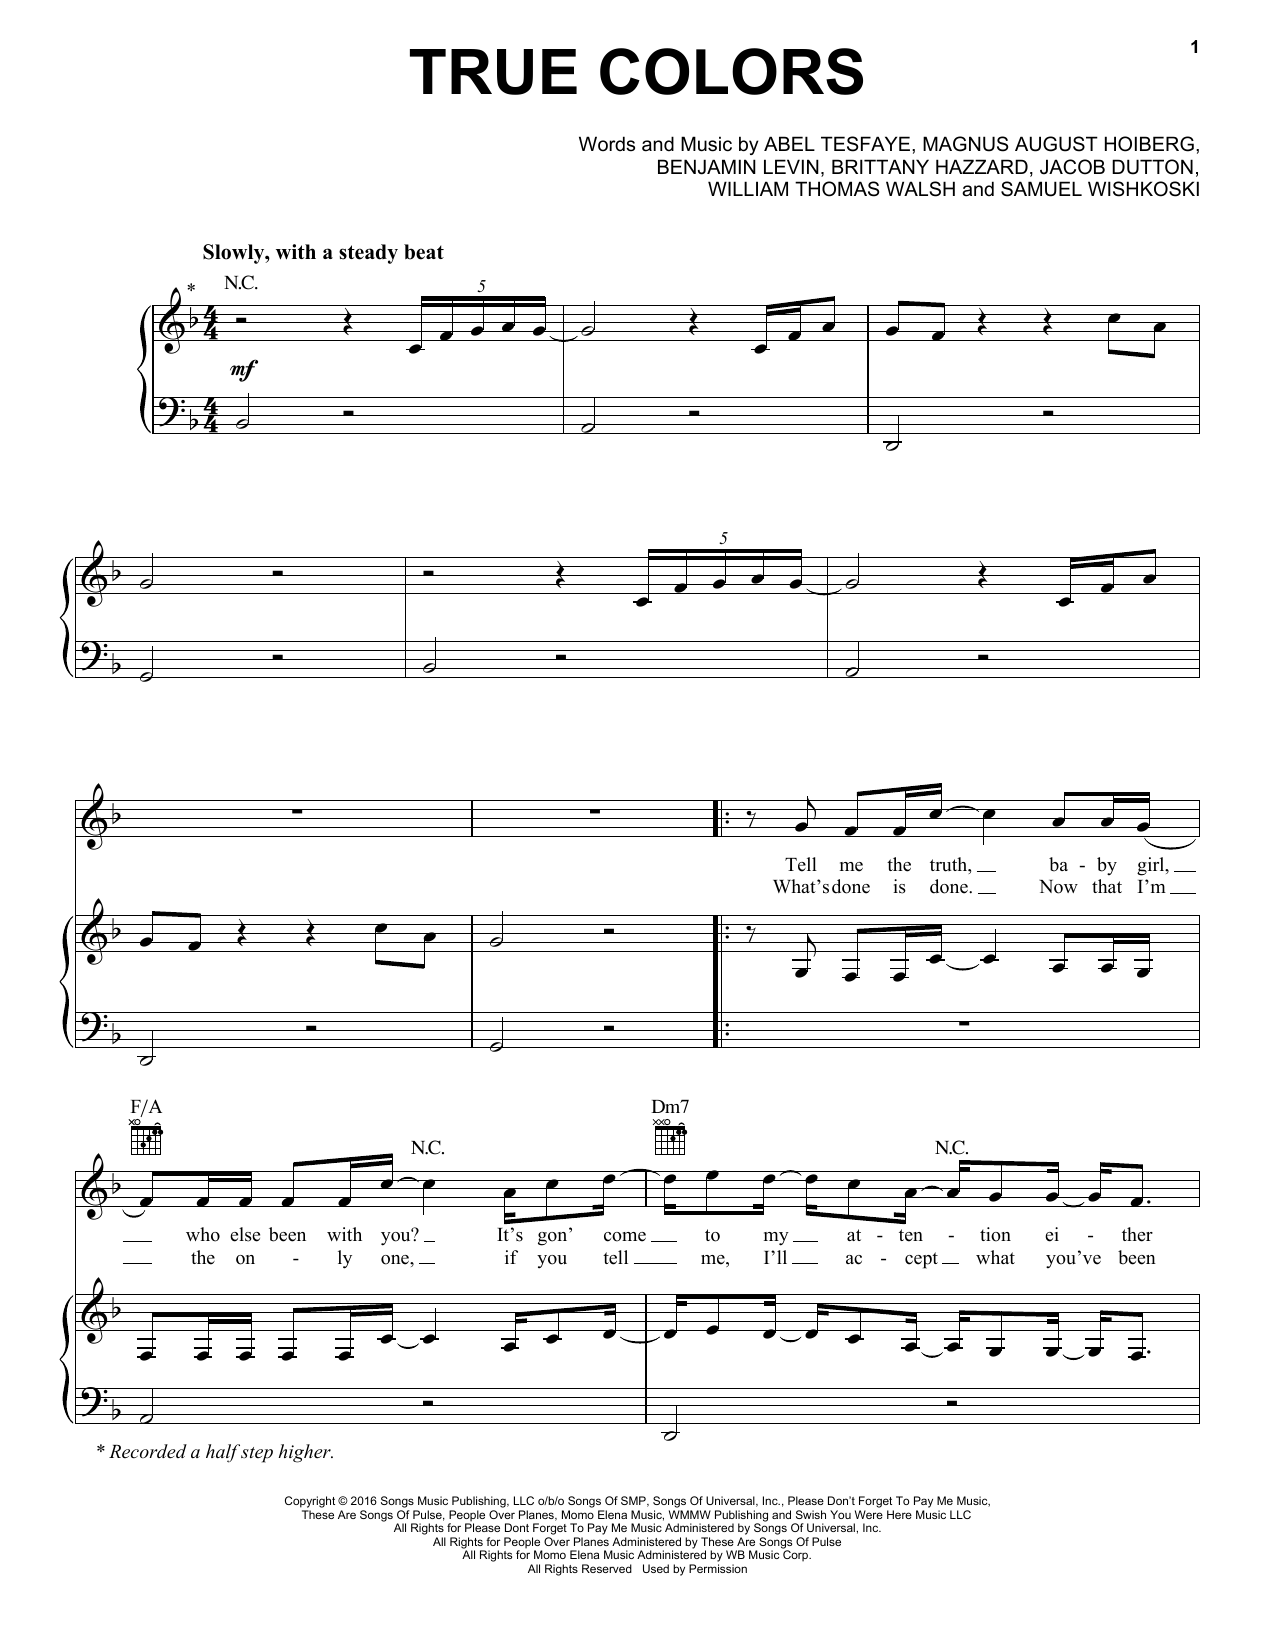 Download The Weeknd True Colors Sheet Music